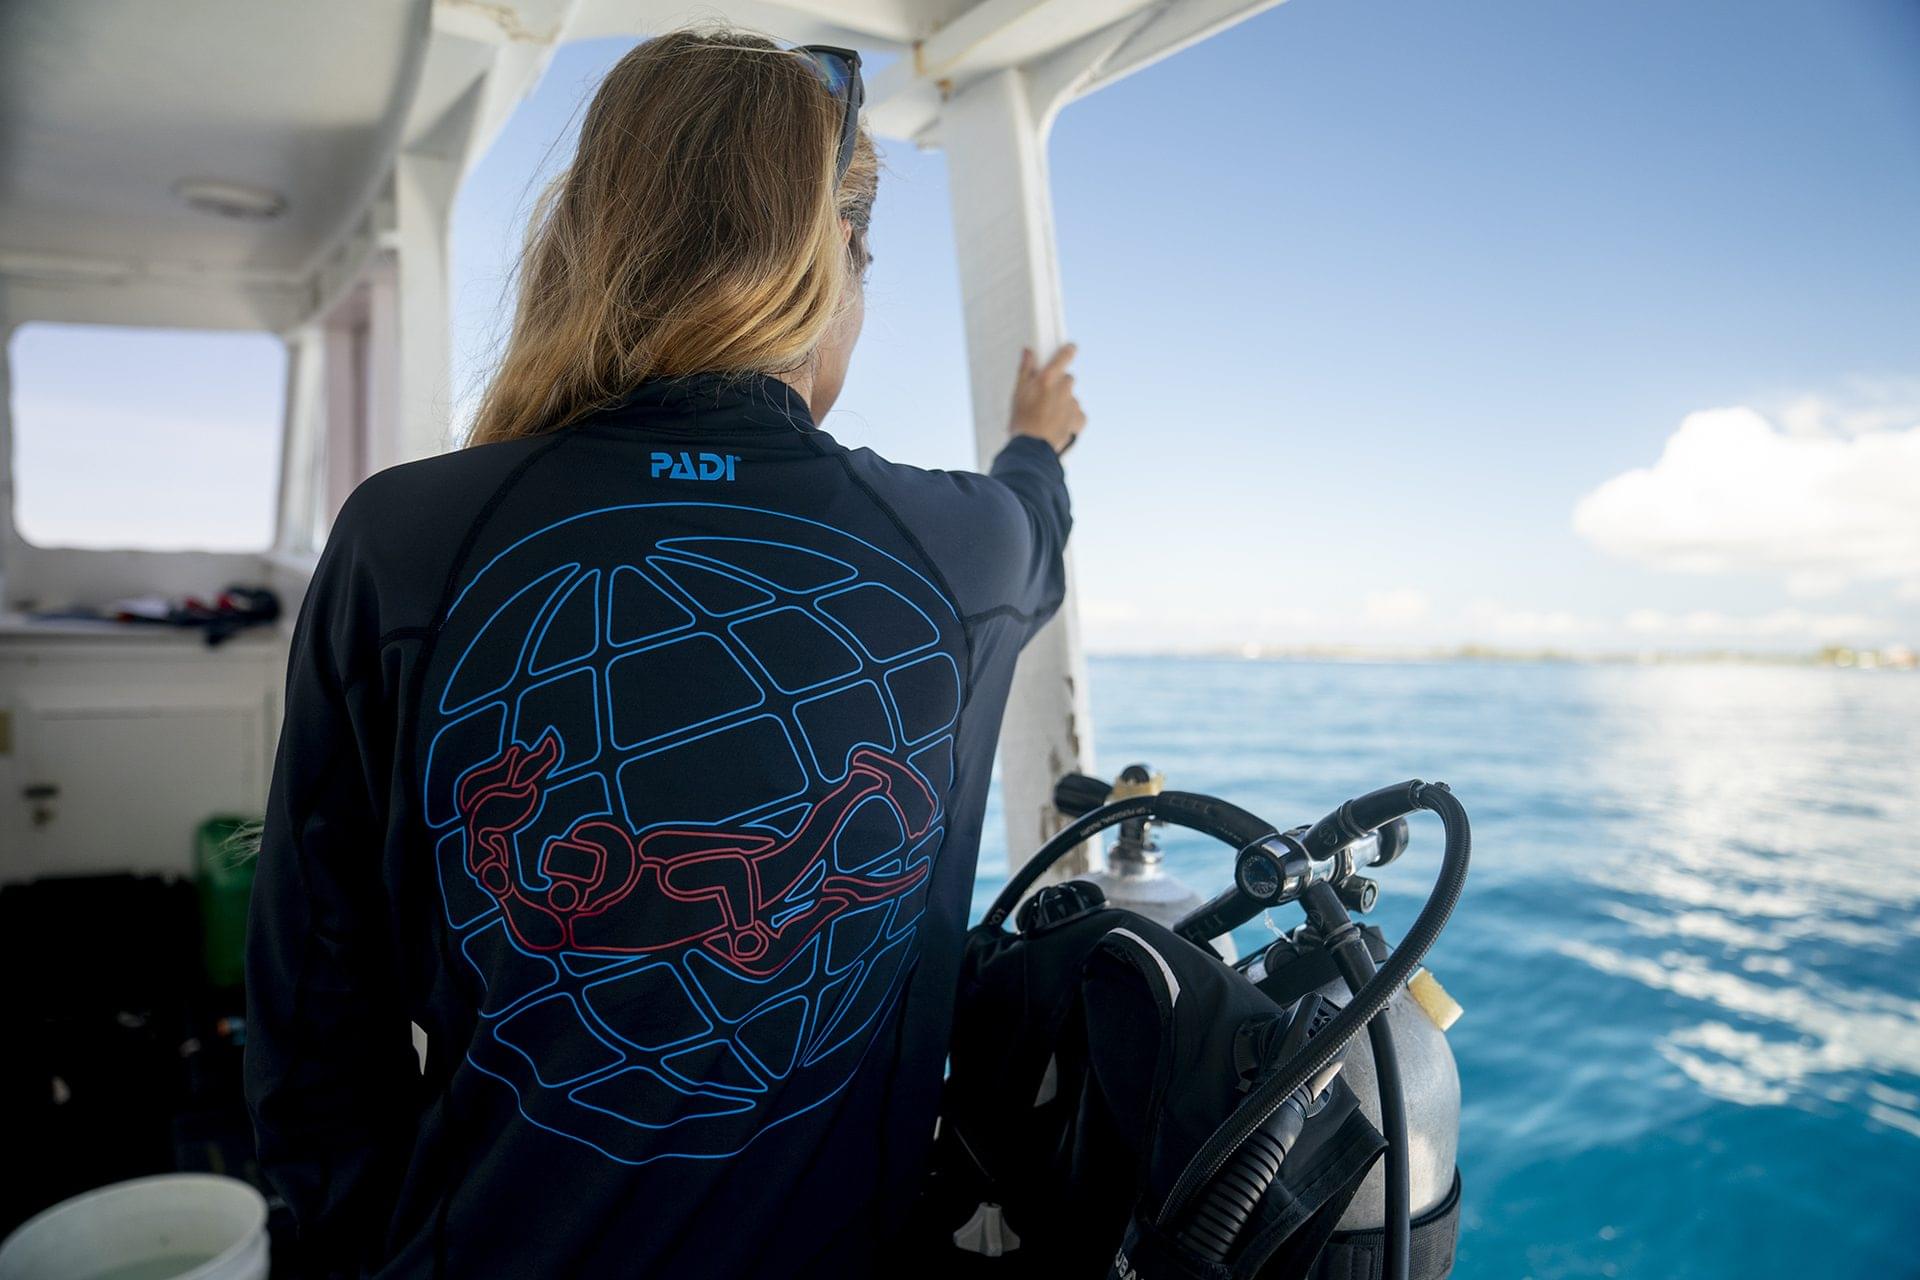 padi travel scuba travel experts advice for bookings